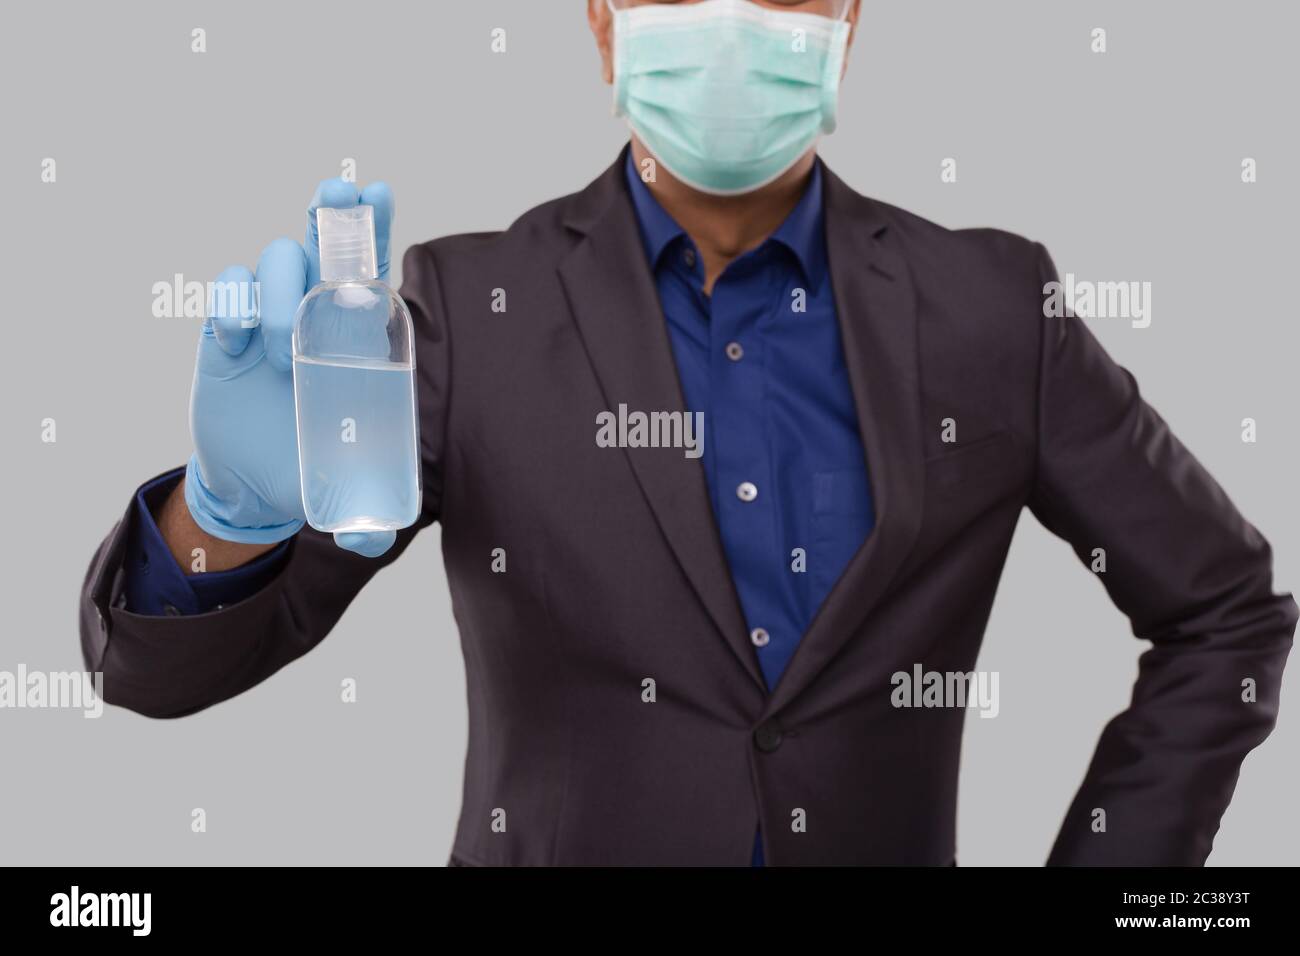 Businessman Showing Hands Sanitizer Wearing Medical Mask and Gloves Close Up. Indian Business man Holding Hand Antiseptic Stock Photo